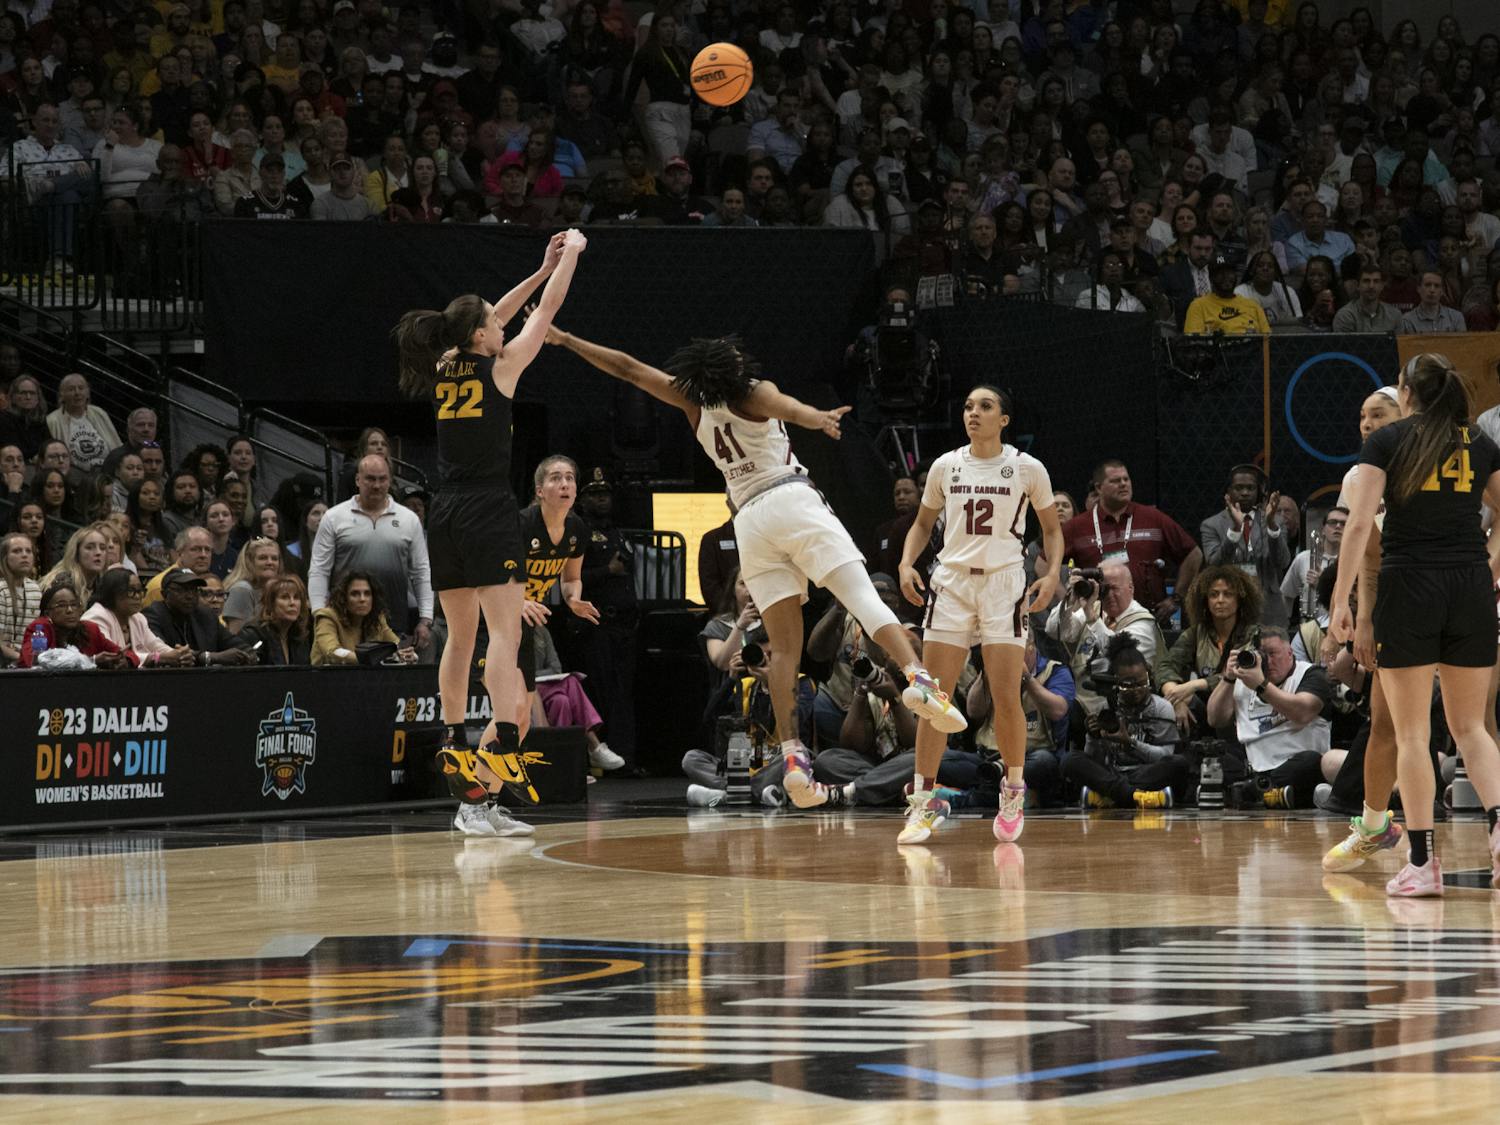 Clark shoots a 3-pointer on graduate student guard Kierra Fletcher. Clark, the 2023 Naismith Player of the Year, ended the night with 41 points. In her 39 minutes of playtime, she attempted 17 3-pointers and made five.